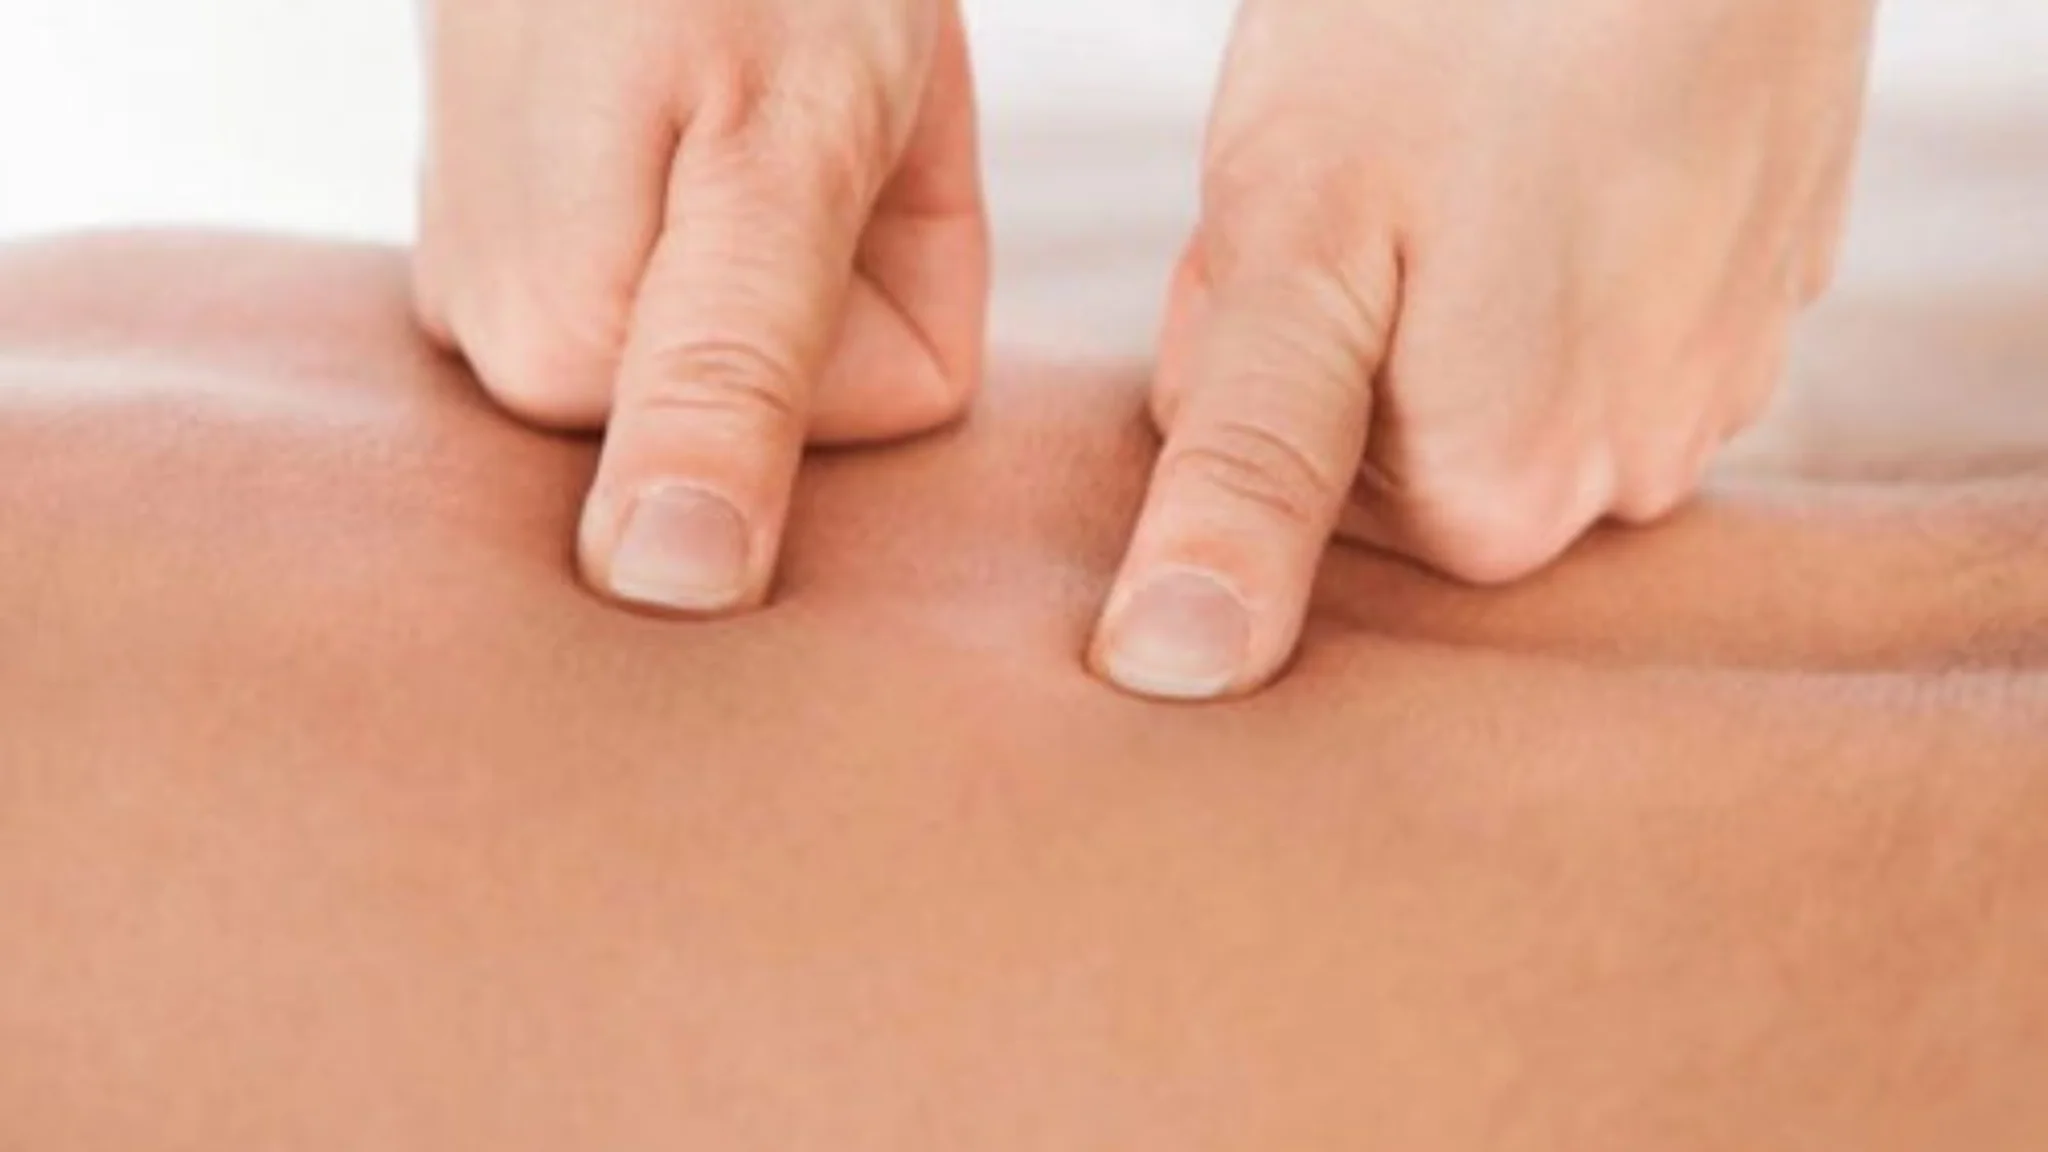 advantages of acupressure therapy, benefits of acupressure therapy, acupressure therapy